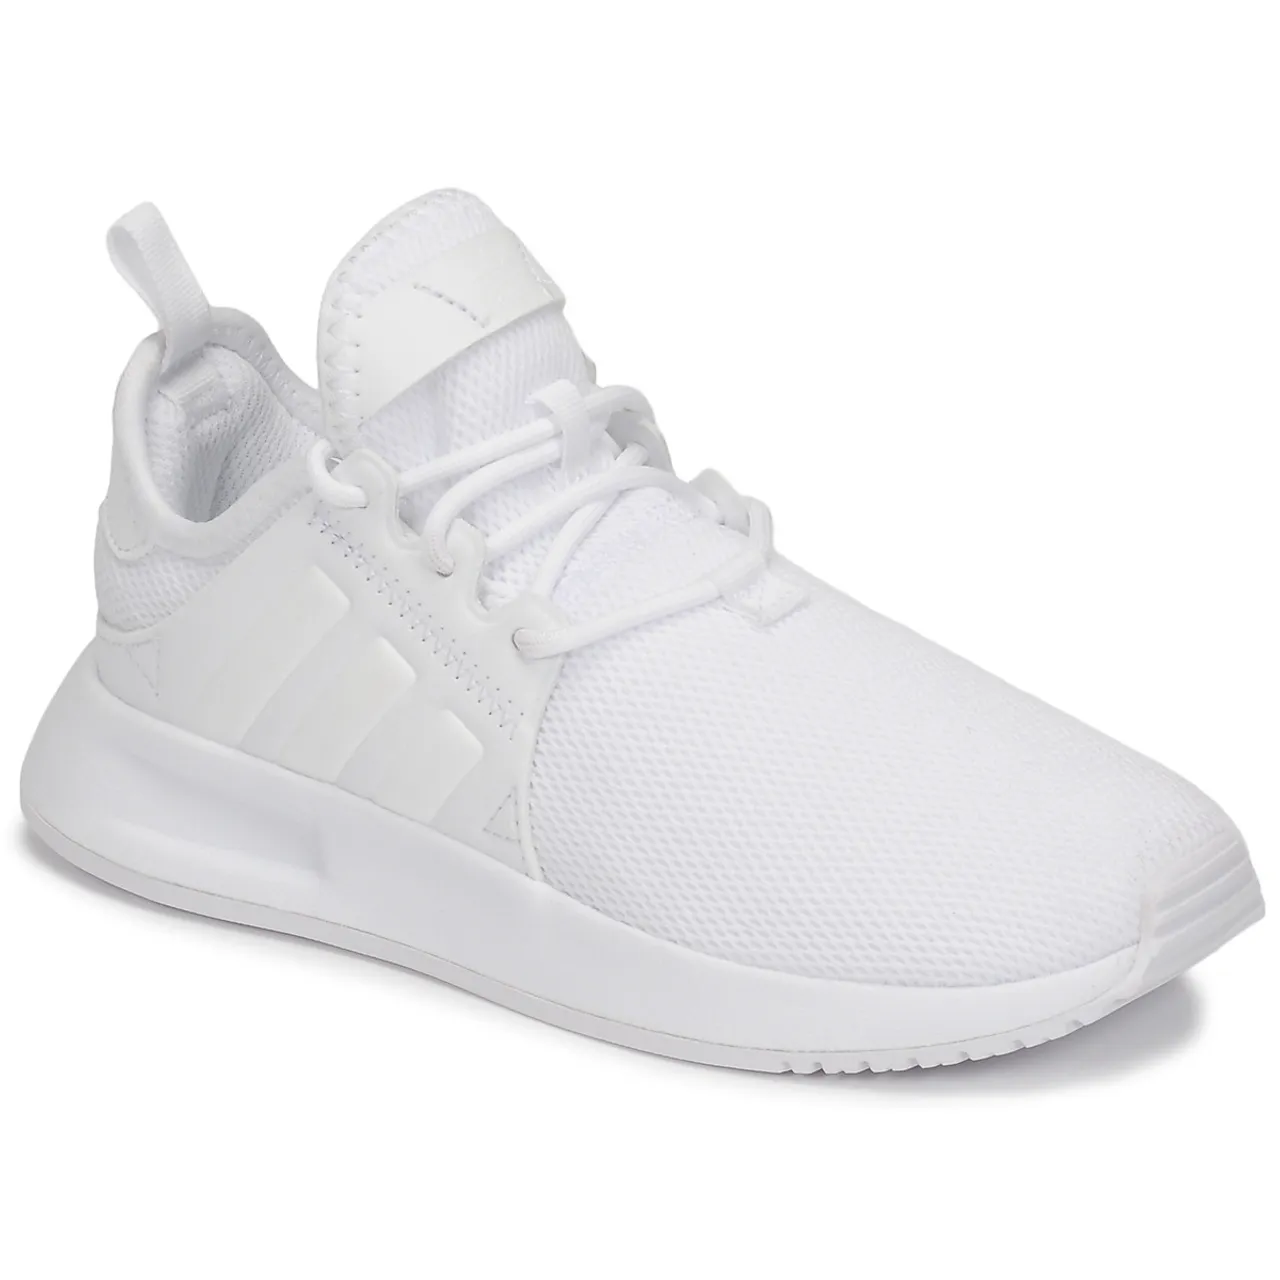 adidas  X_PLR C  boys's Children's Shoes (Trainers) in White